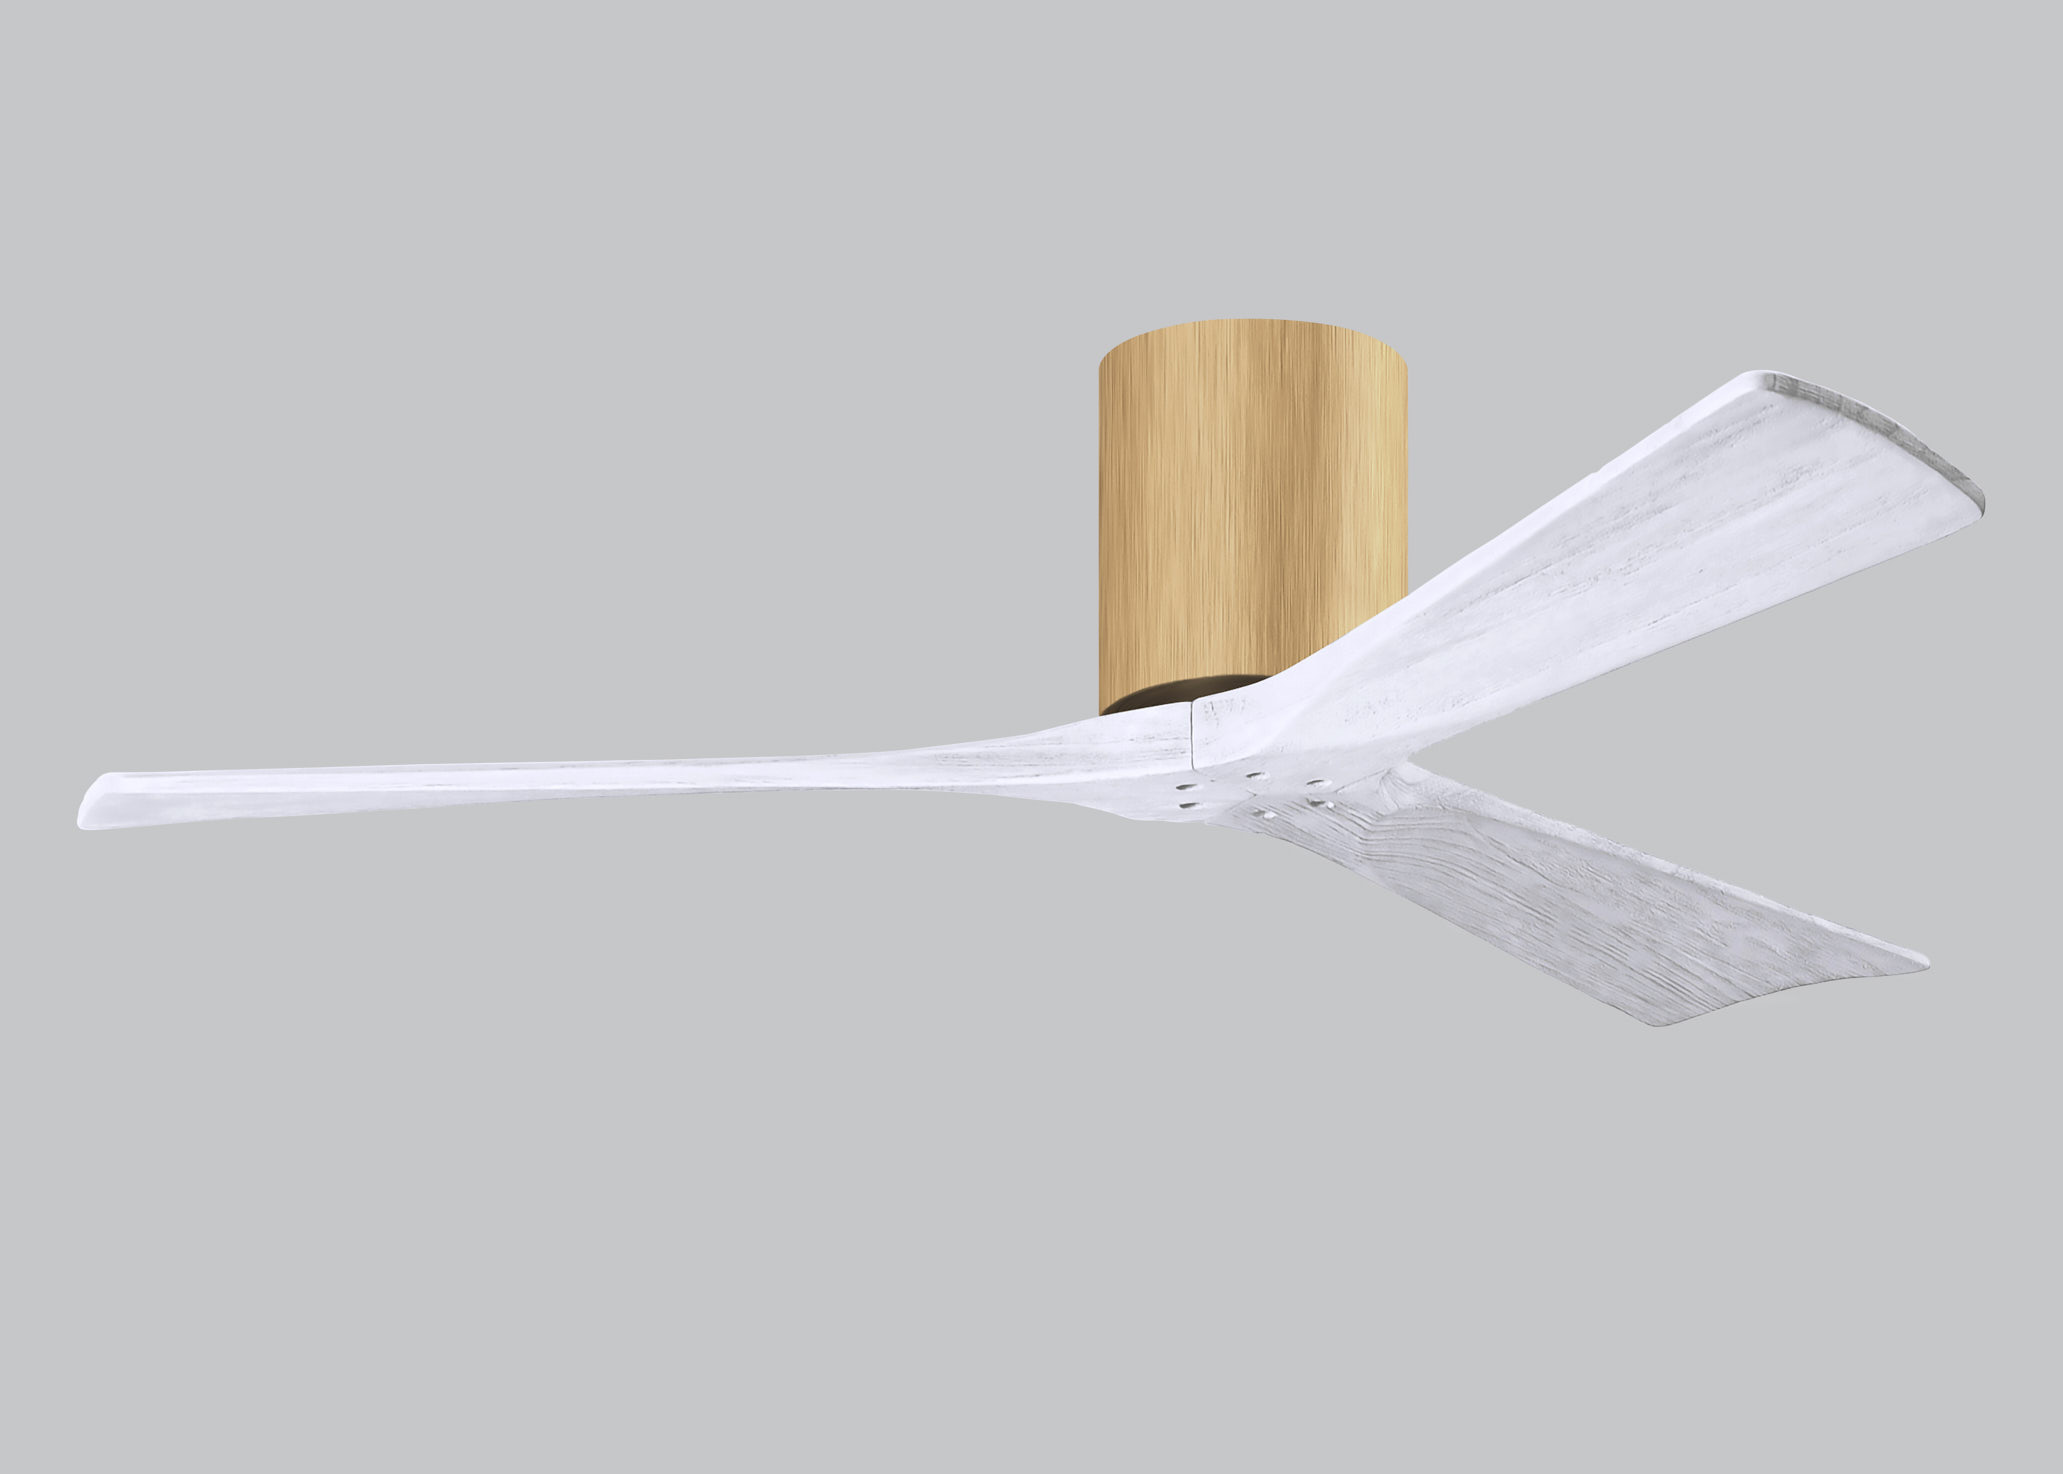 Irene-3H 6-speed ceiling fan in light maple finish with 52